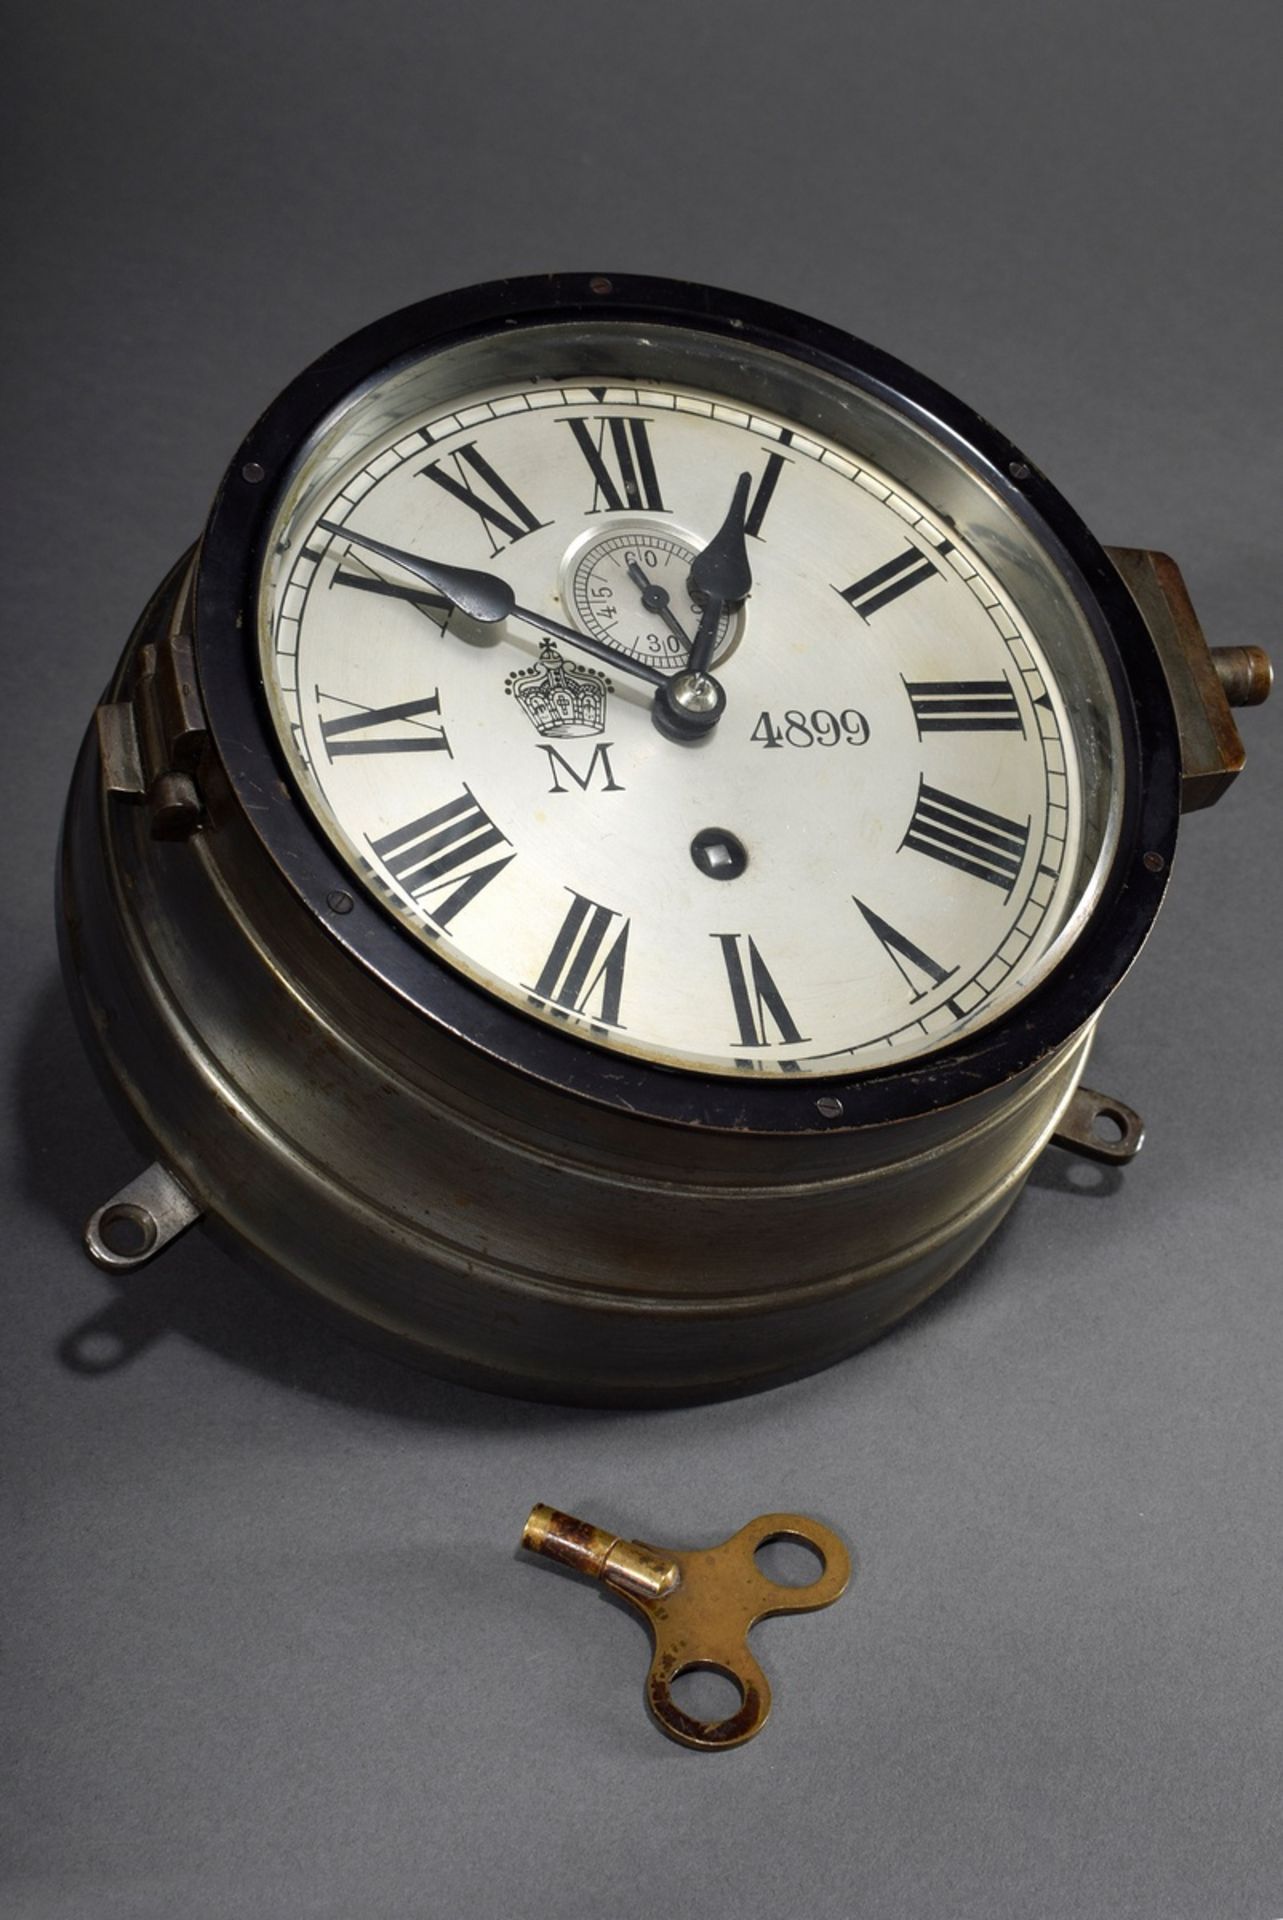 Marine chronometer in brass case (num. 2331756) with metal dial and Roman numerals and small second